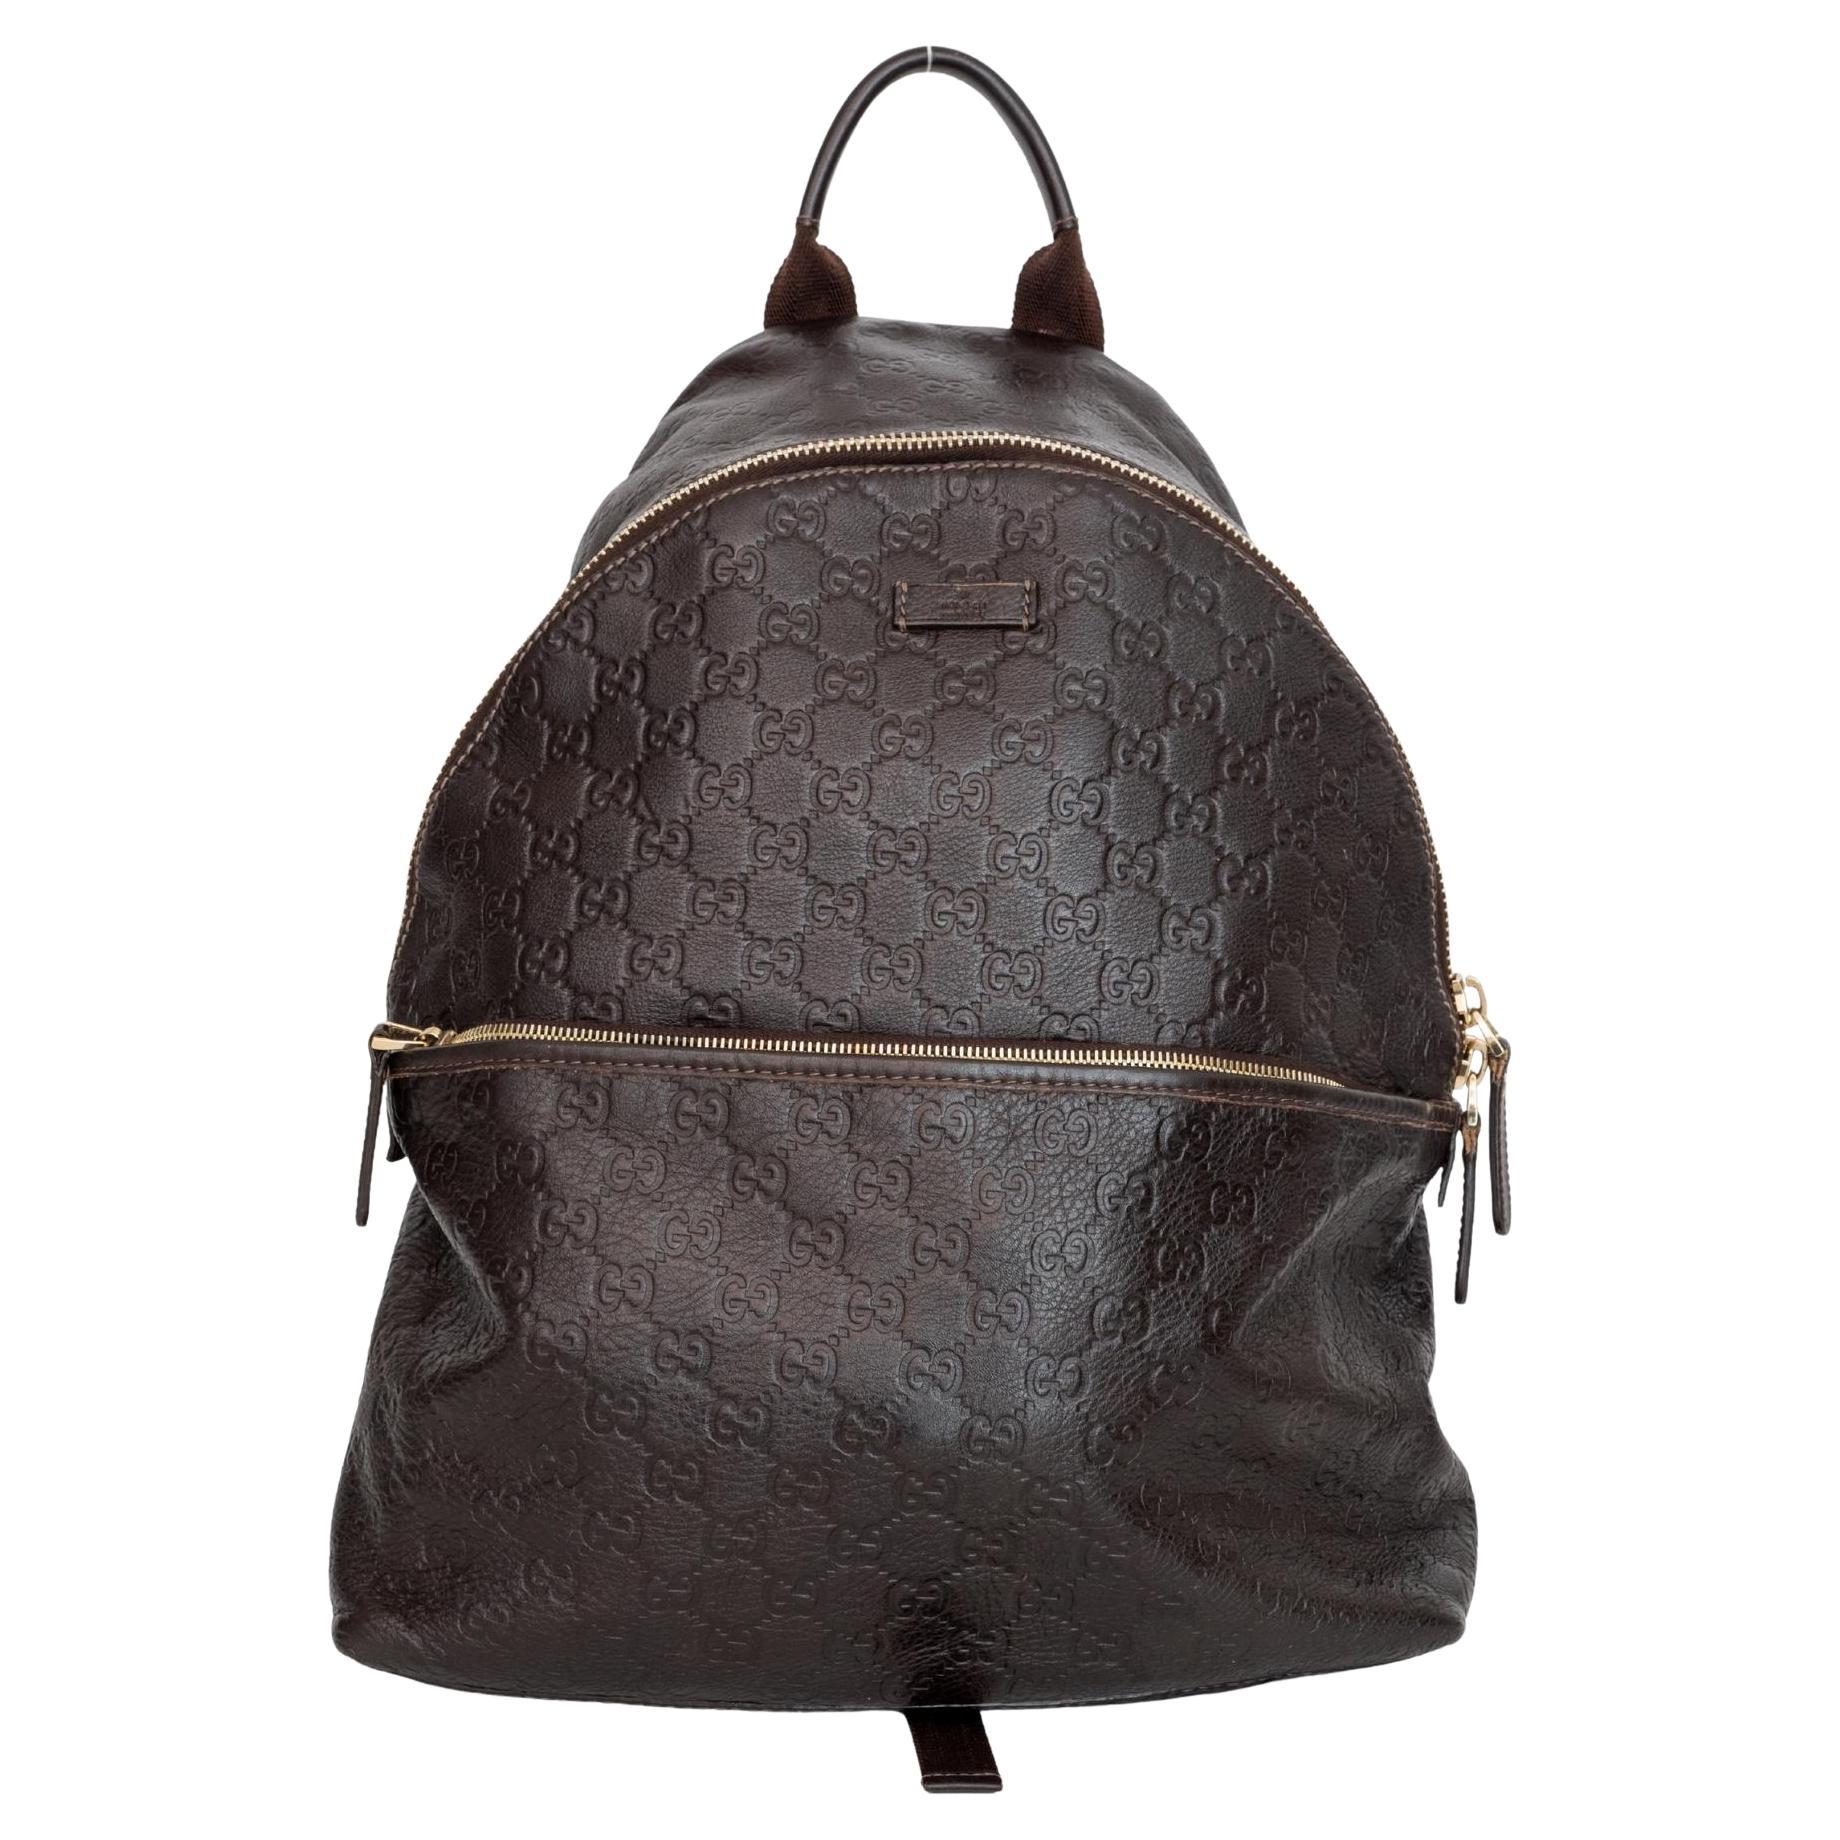 Gucci Brown Guccissima Leather Medium Classic Backpack (246414)